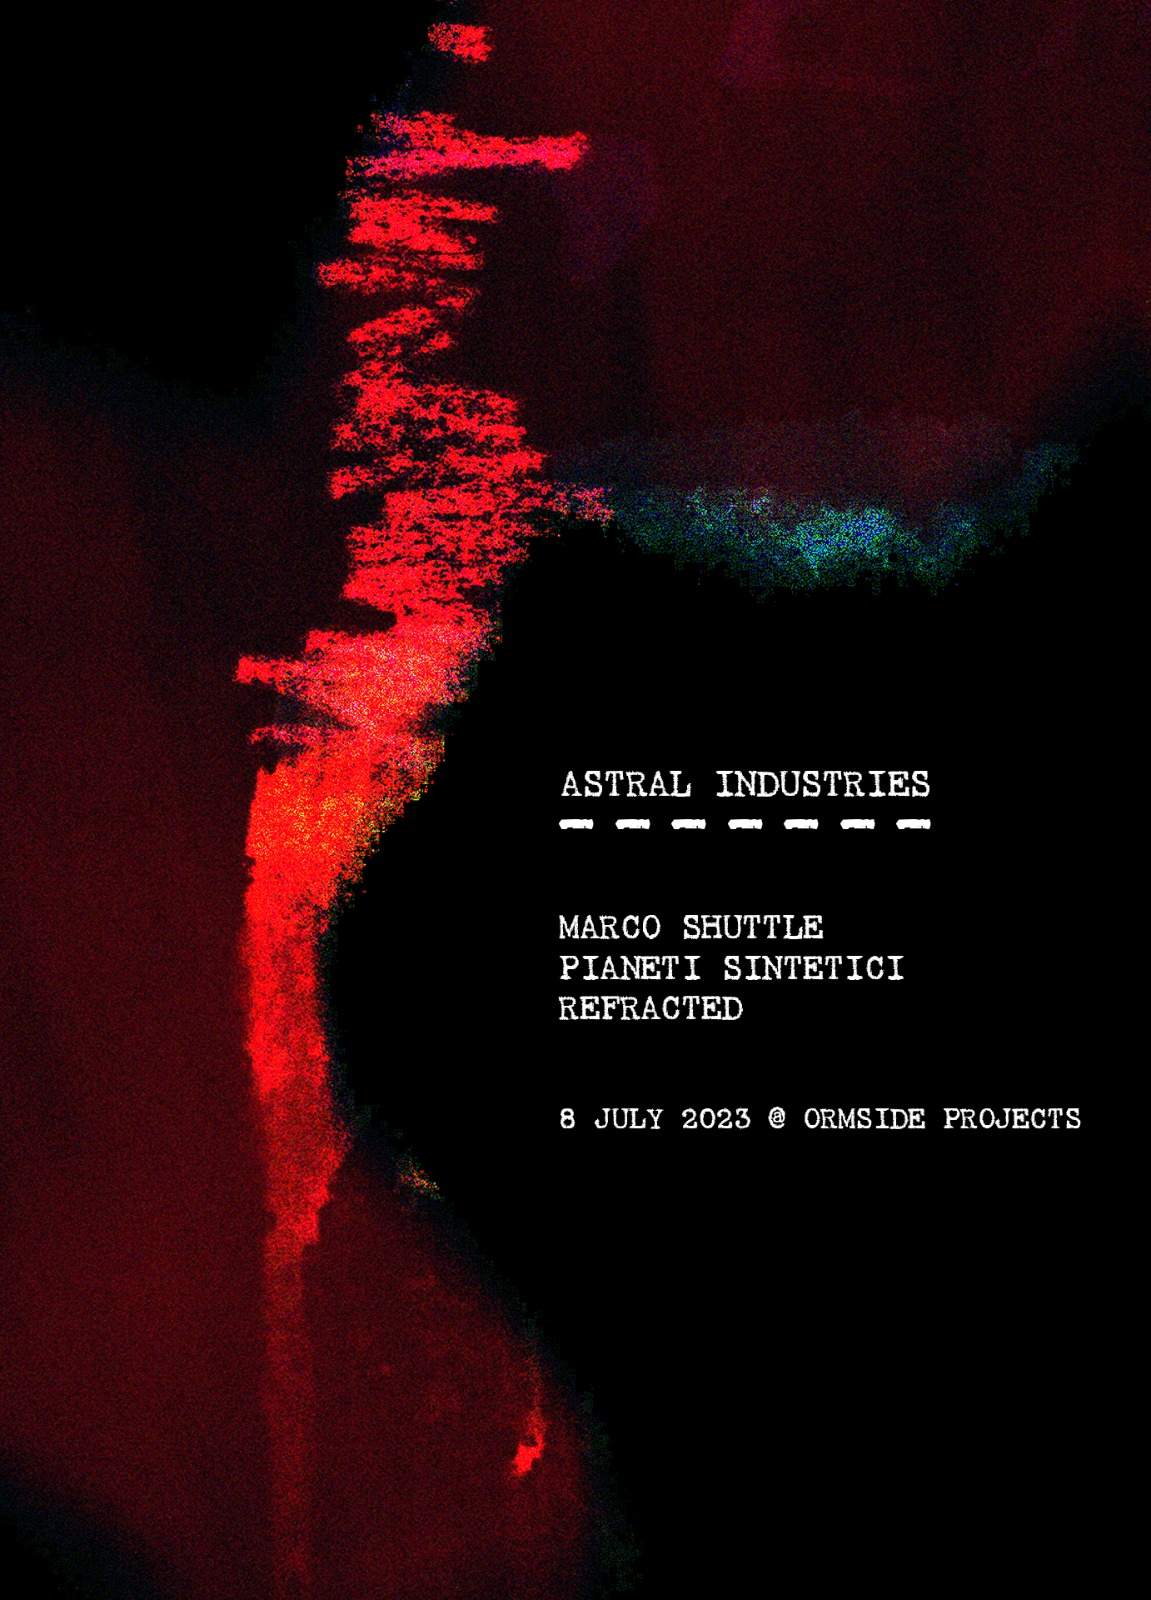 Astral Industries with Marco Shuttle, Refracted & Pianeti Sintetici - Página frontal